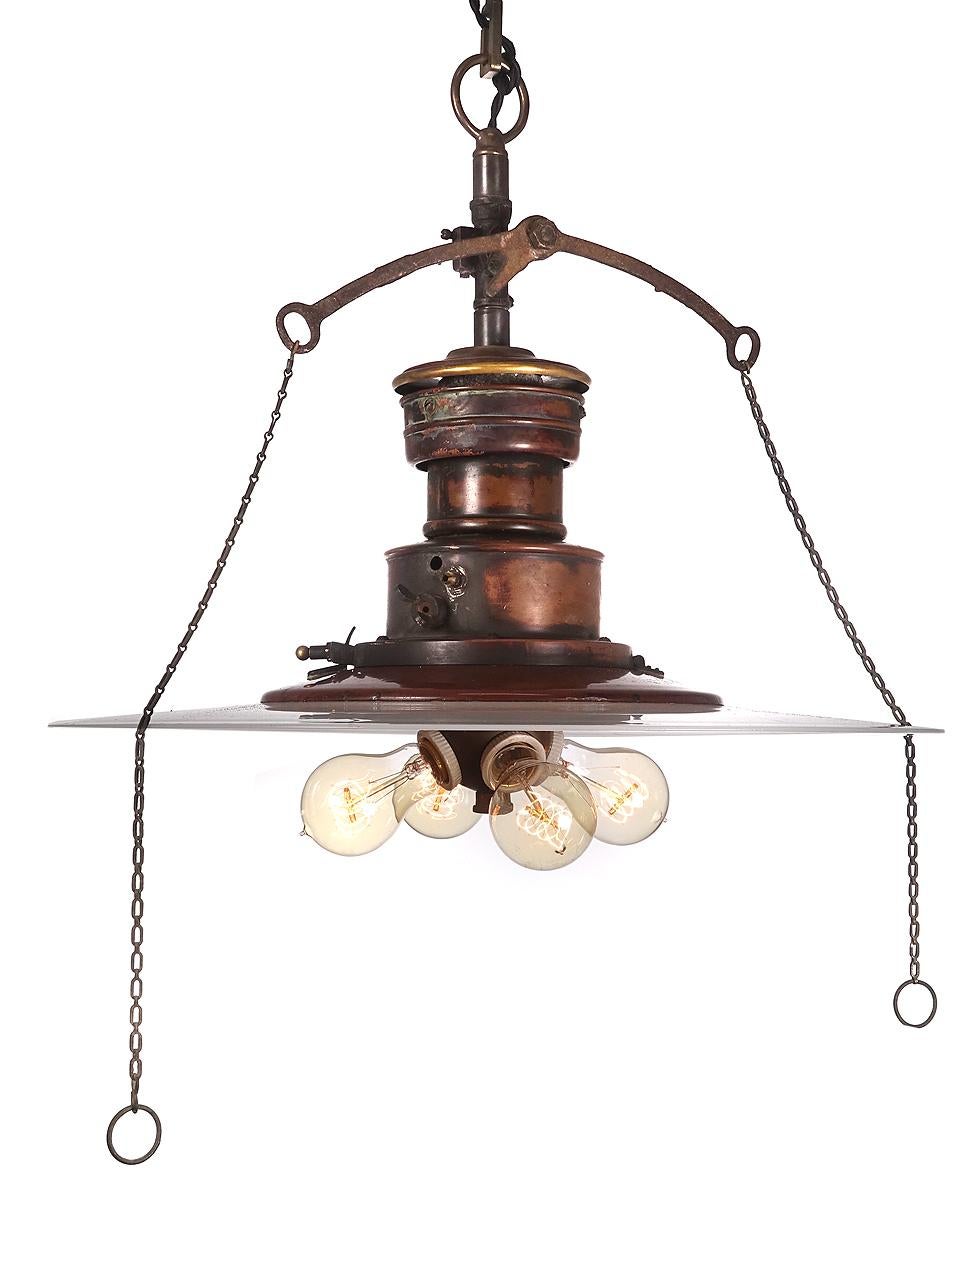 We love the look of this lamp. You just can't find hand blown 20 inch flat milk glass disk shades anymore. The shade featured on this lamp is very flat and that is desirable. It also has a rare 4 bulb Benjamin bulb cluster. The lamp is all copper